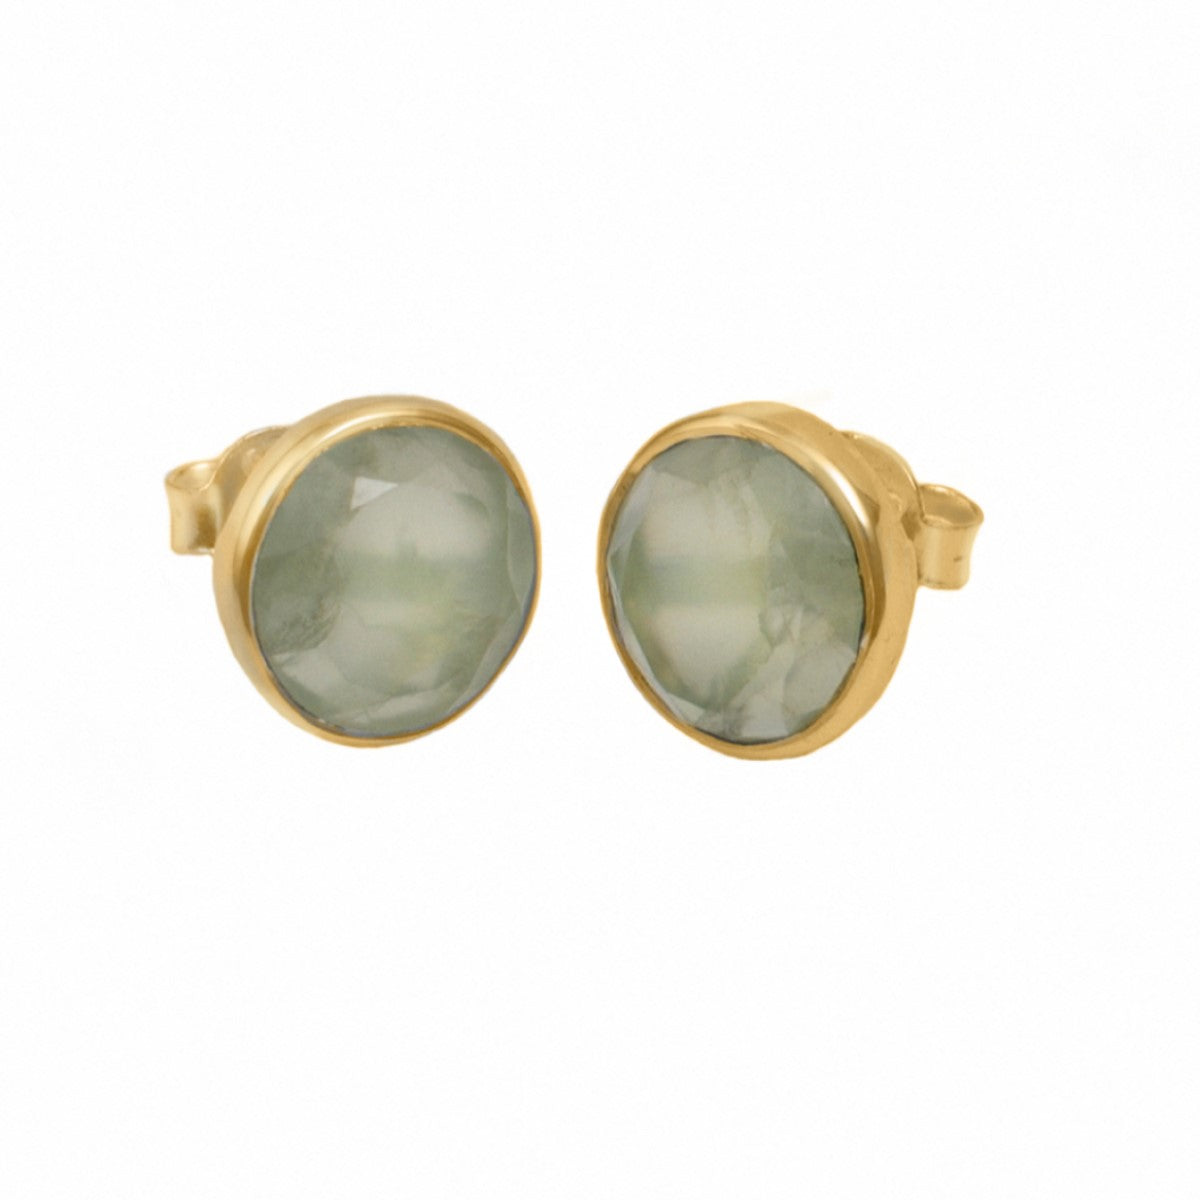 Prehnite Studs in Gold Plated Sterling Silver with a Round Faceted Gemstone